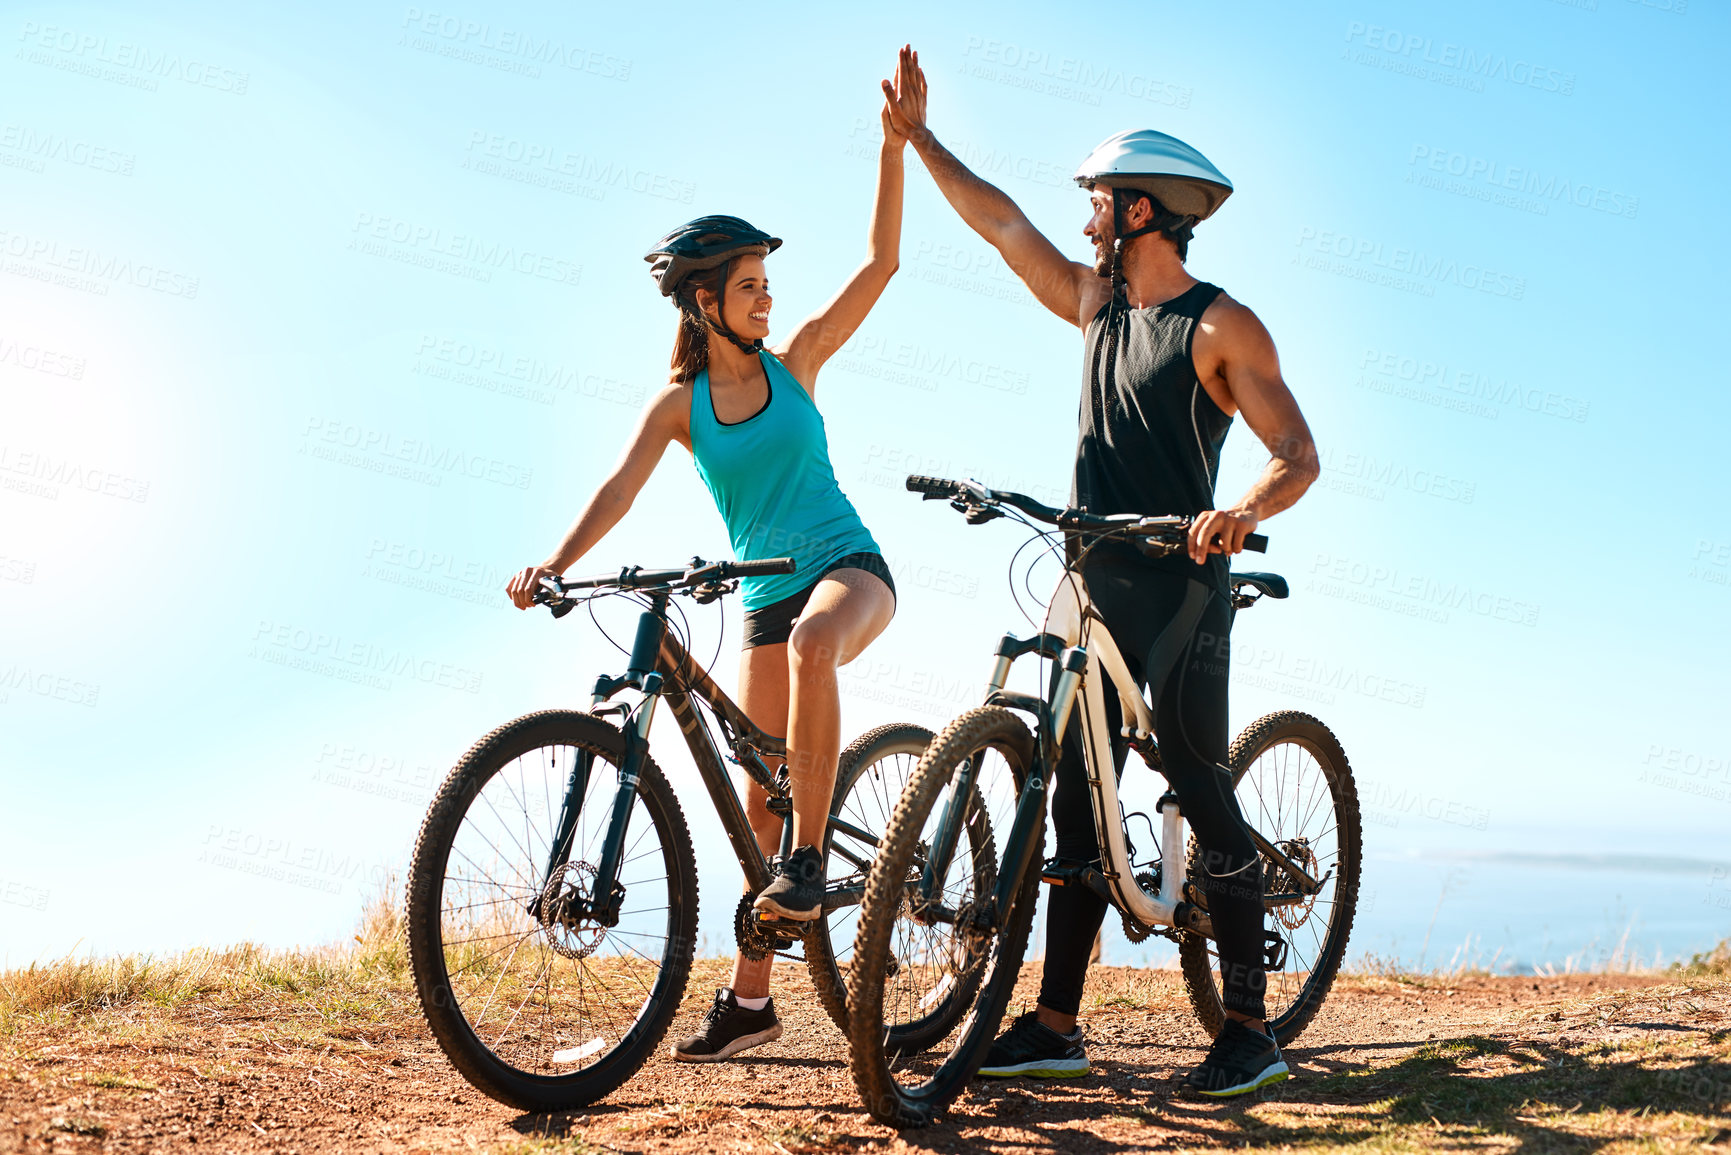 Buy stock photo Full length shot of a happy young couple high fiving while out mountain biking together